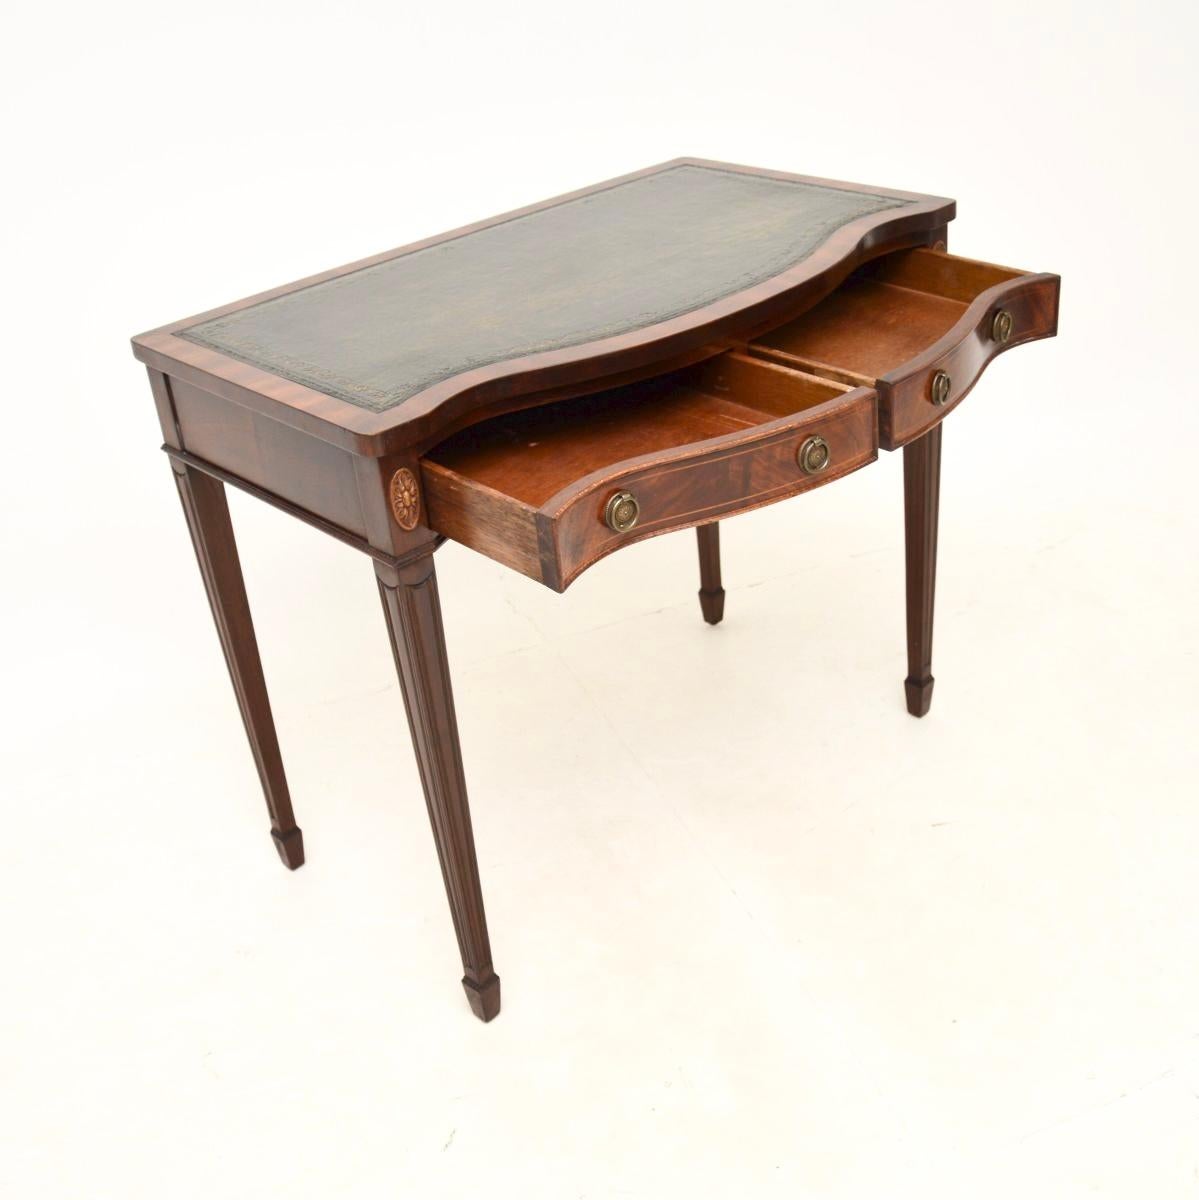 A smart and useful antique leather top desk / console table. This was made in England, it is in the Georgian style and dates from around the 1950’s.

The quality is superb and this is a very practical size, perfect for use as either a desk or a